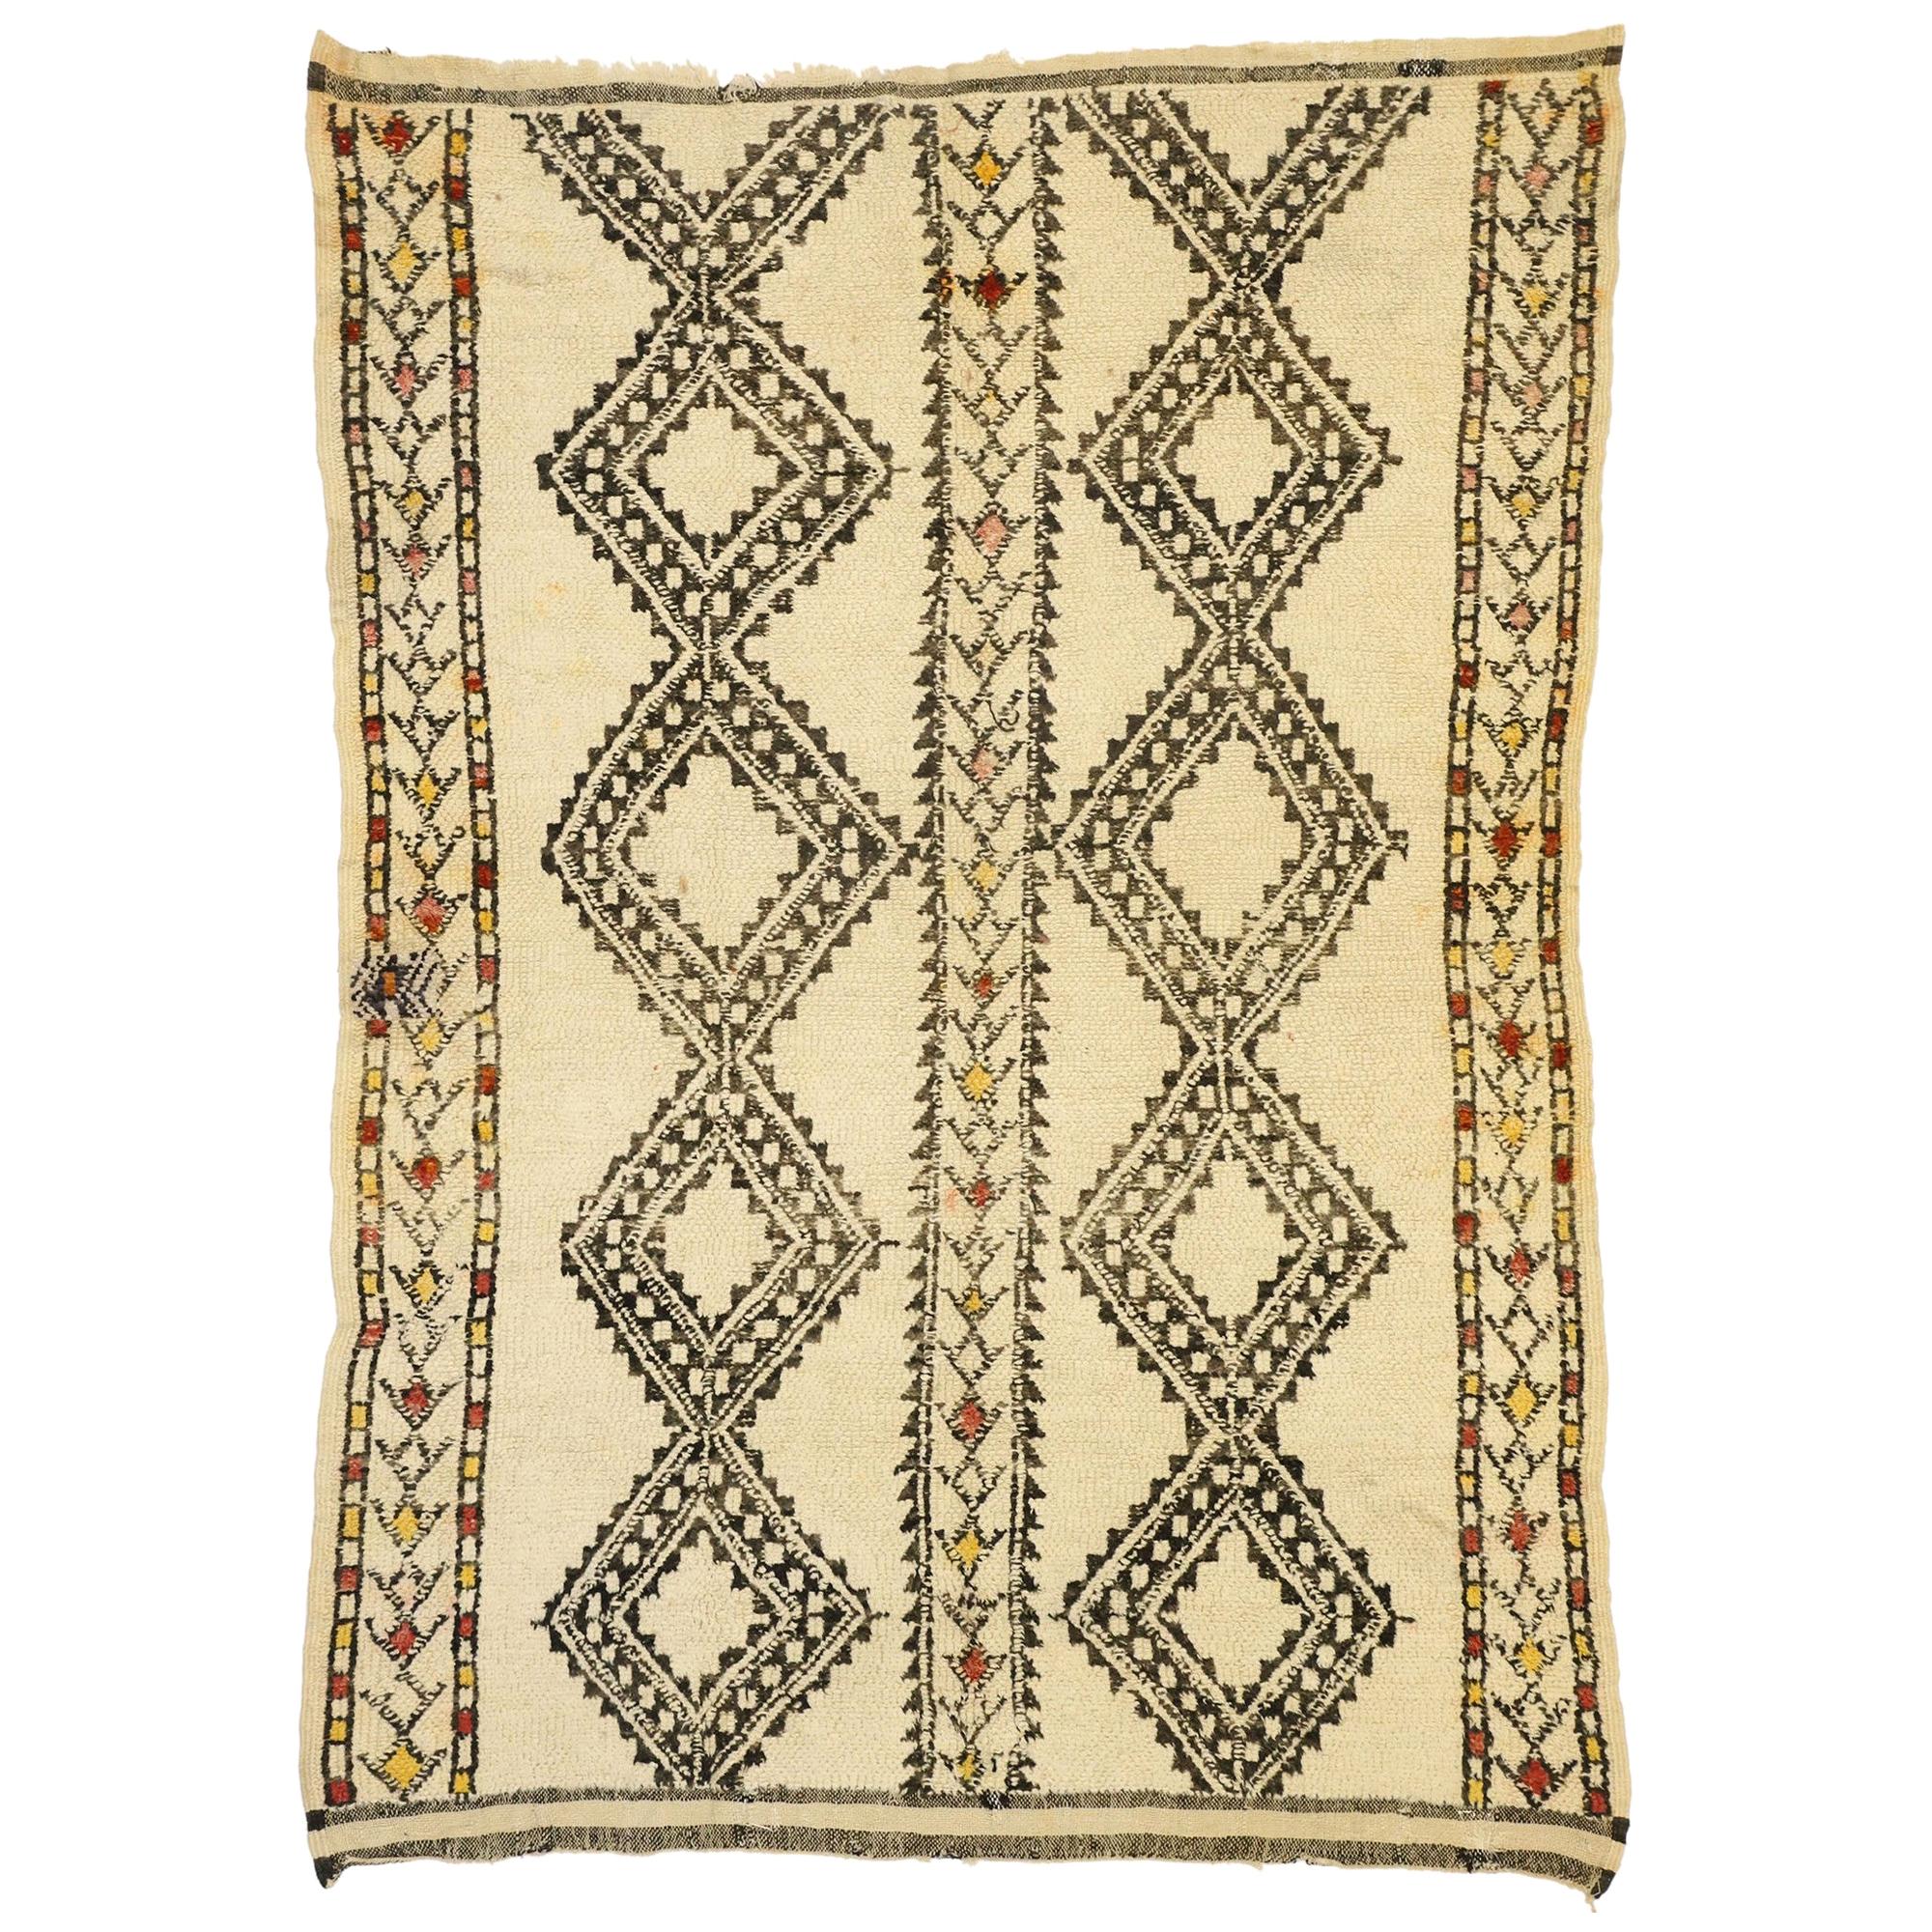 Vintage Beni Ourain Moroccan Rug with Mid-Century Modern Style and Hygge Vibes